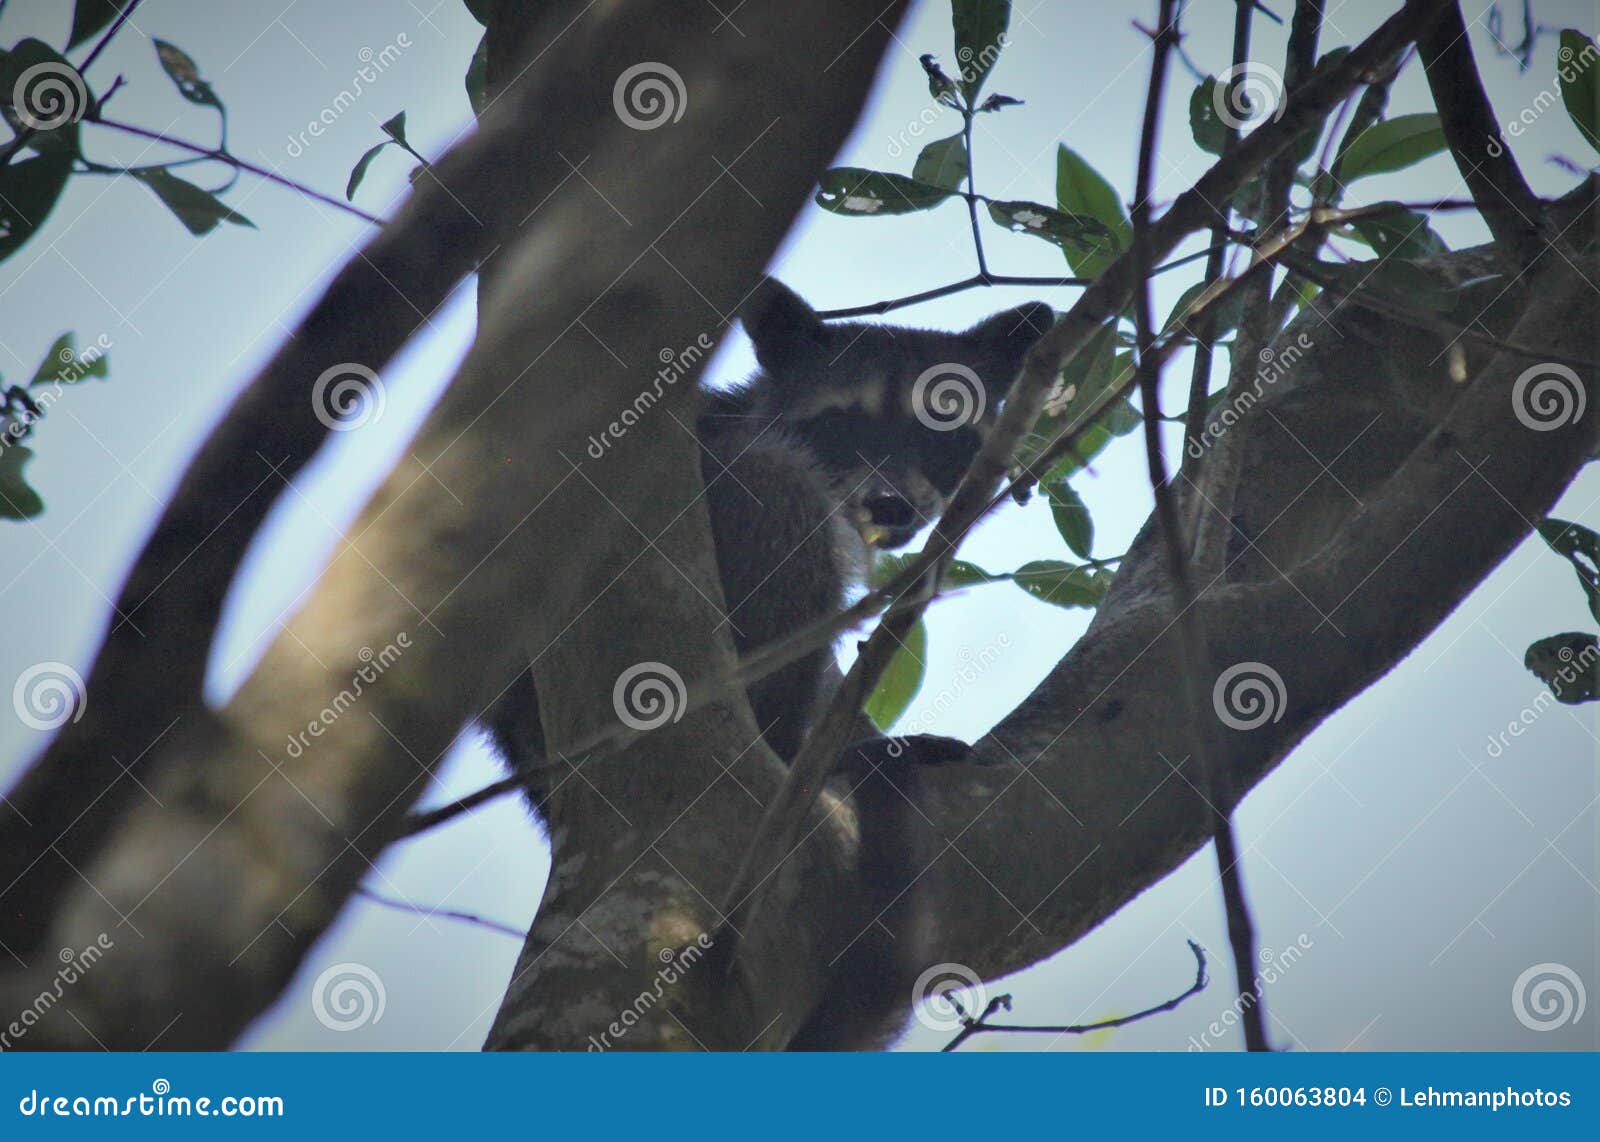 curious raccoon in a tree